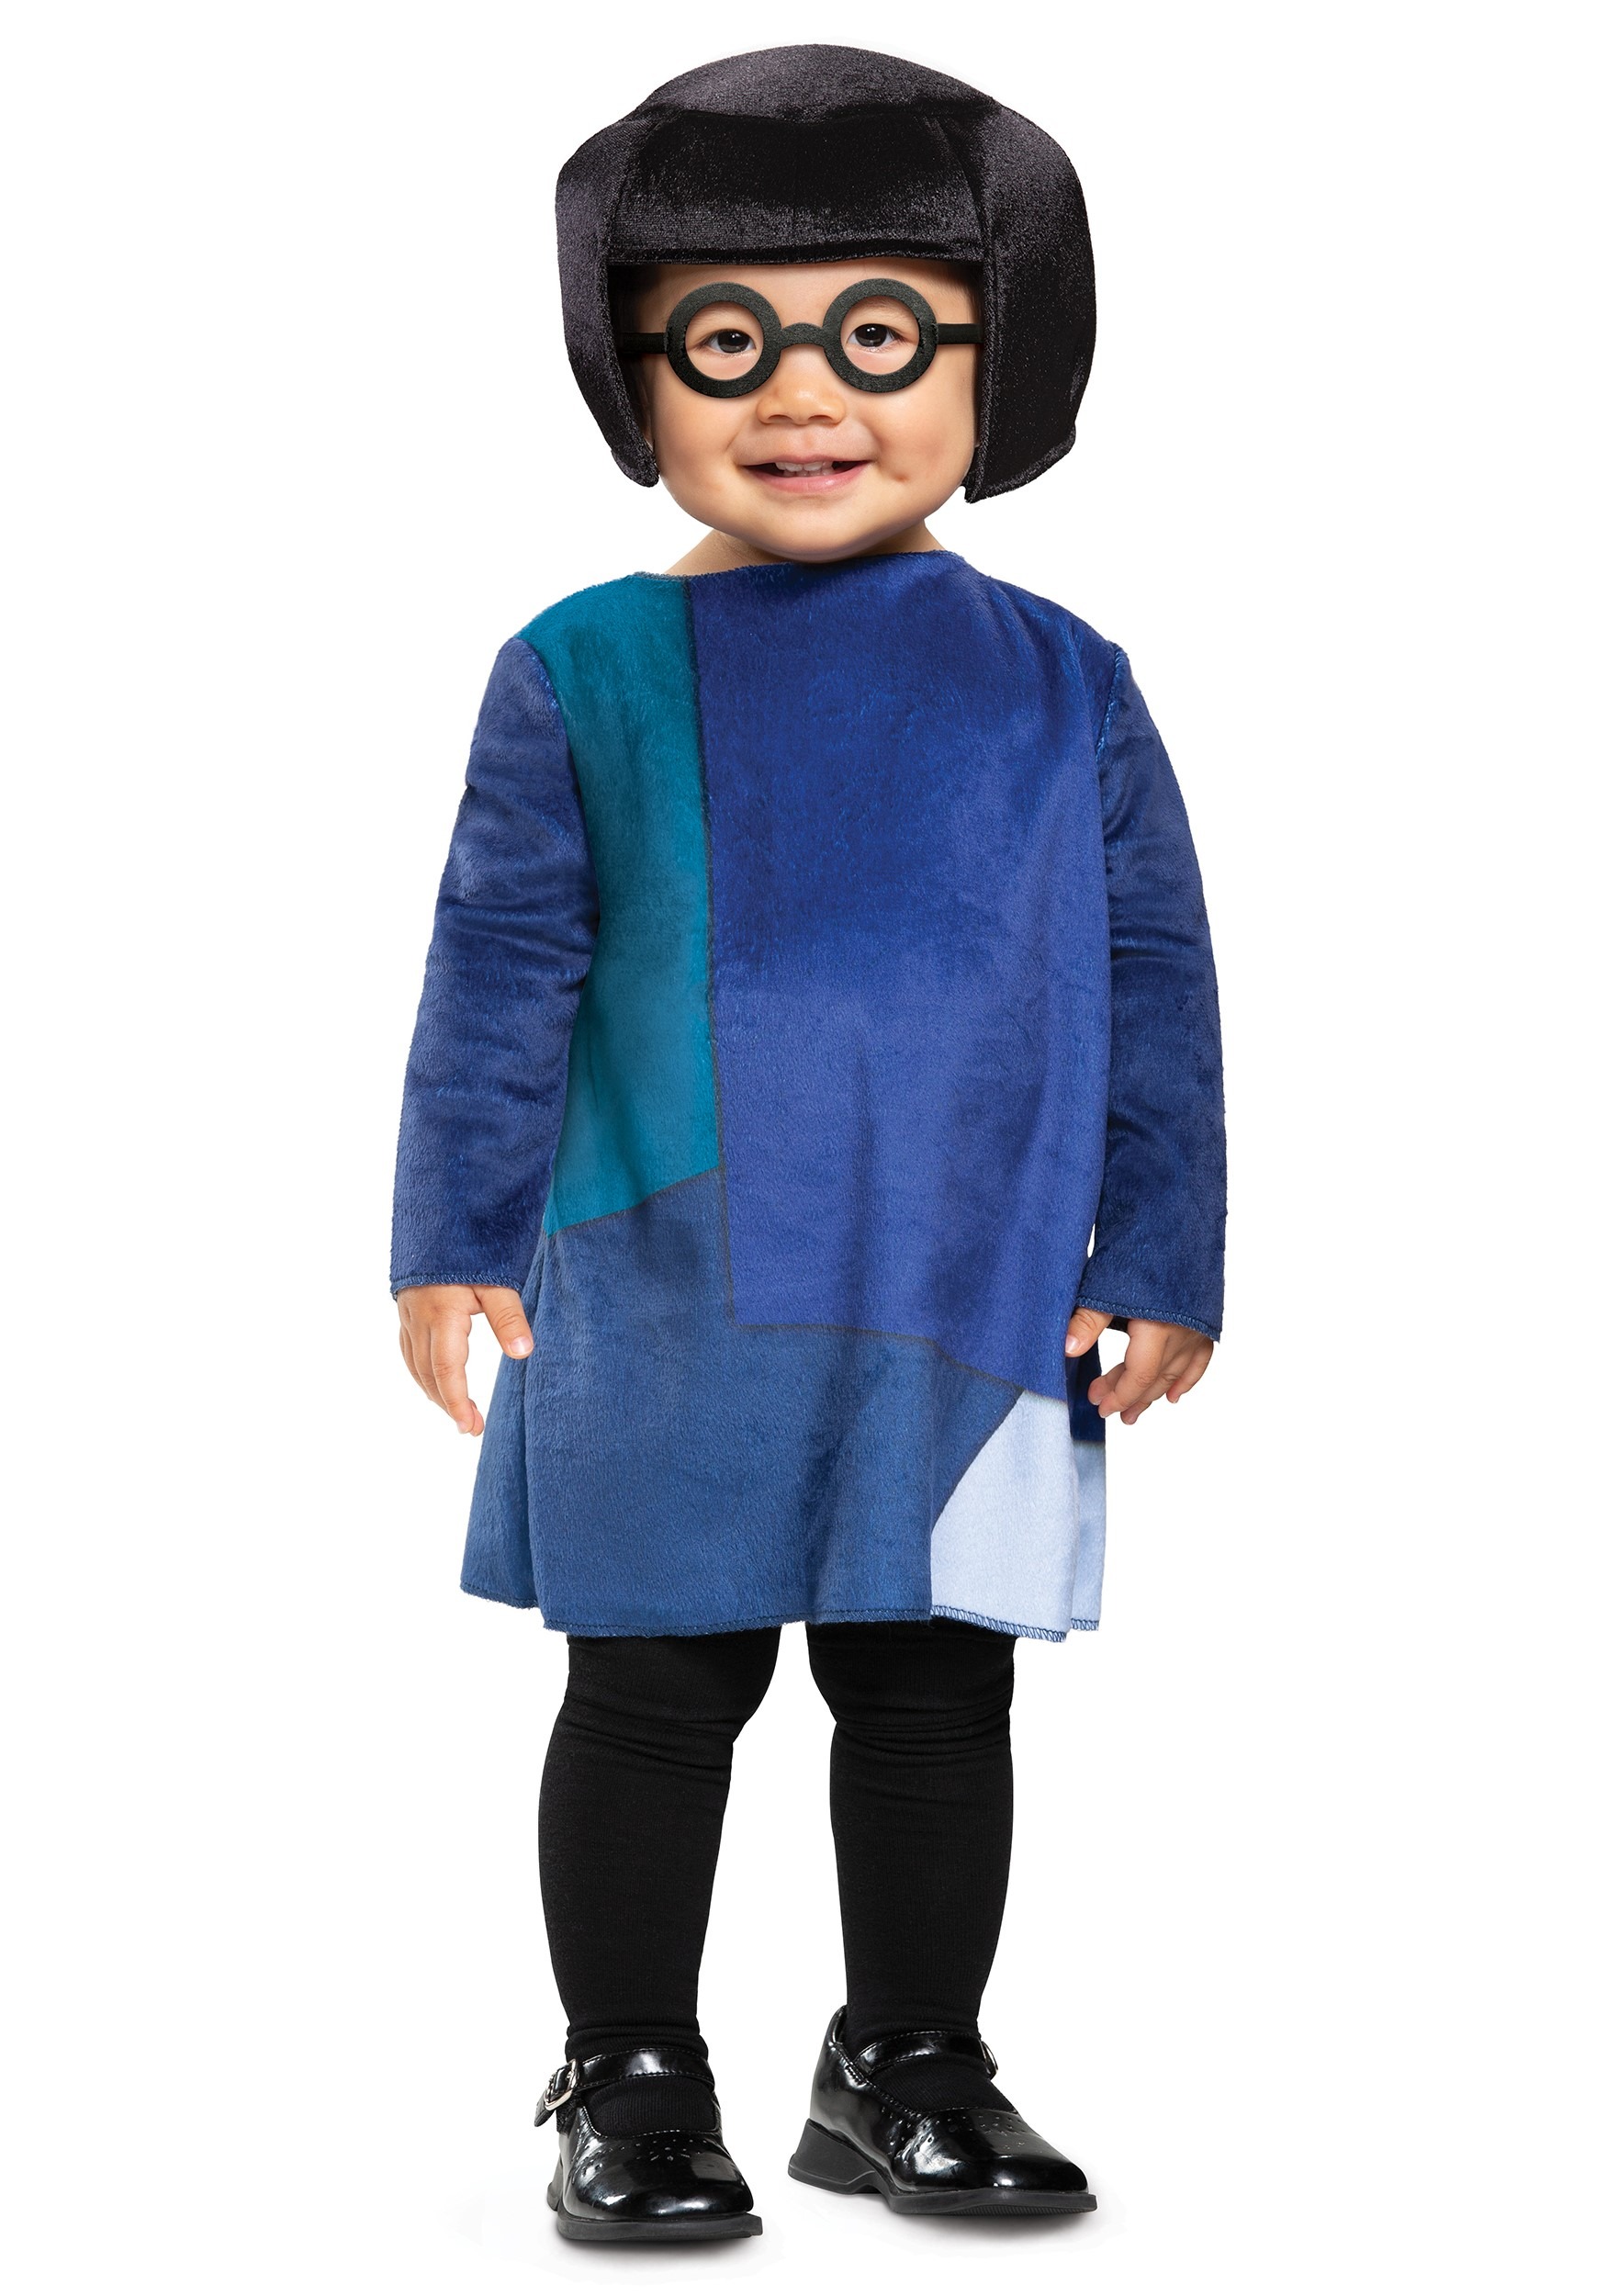 The Incredibles Edna Costume for Toddlers